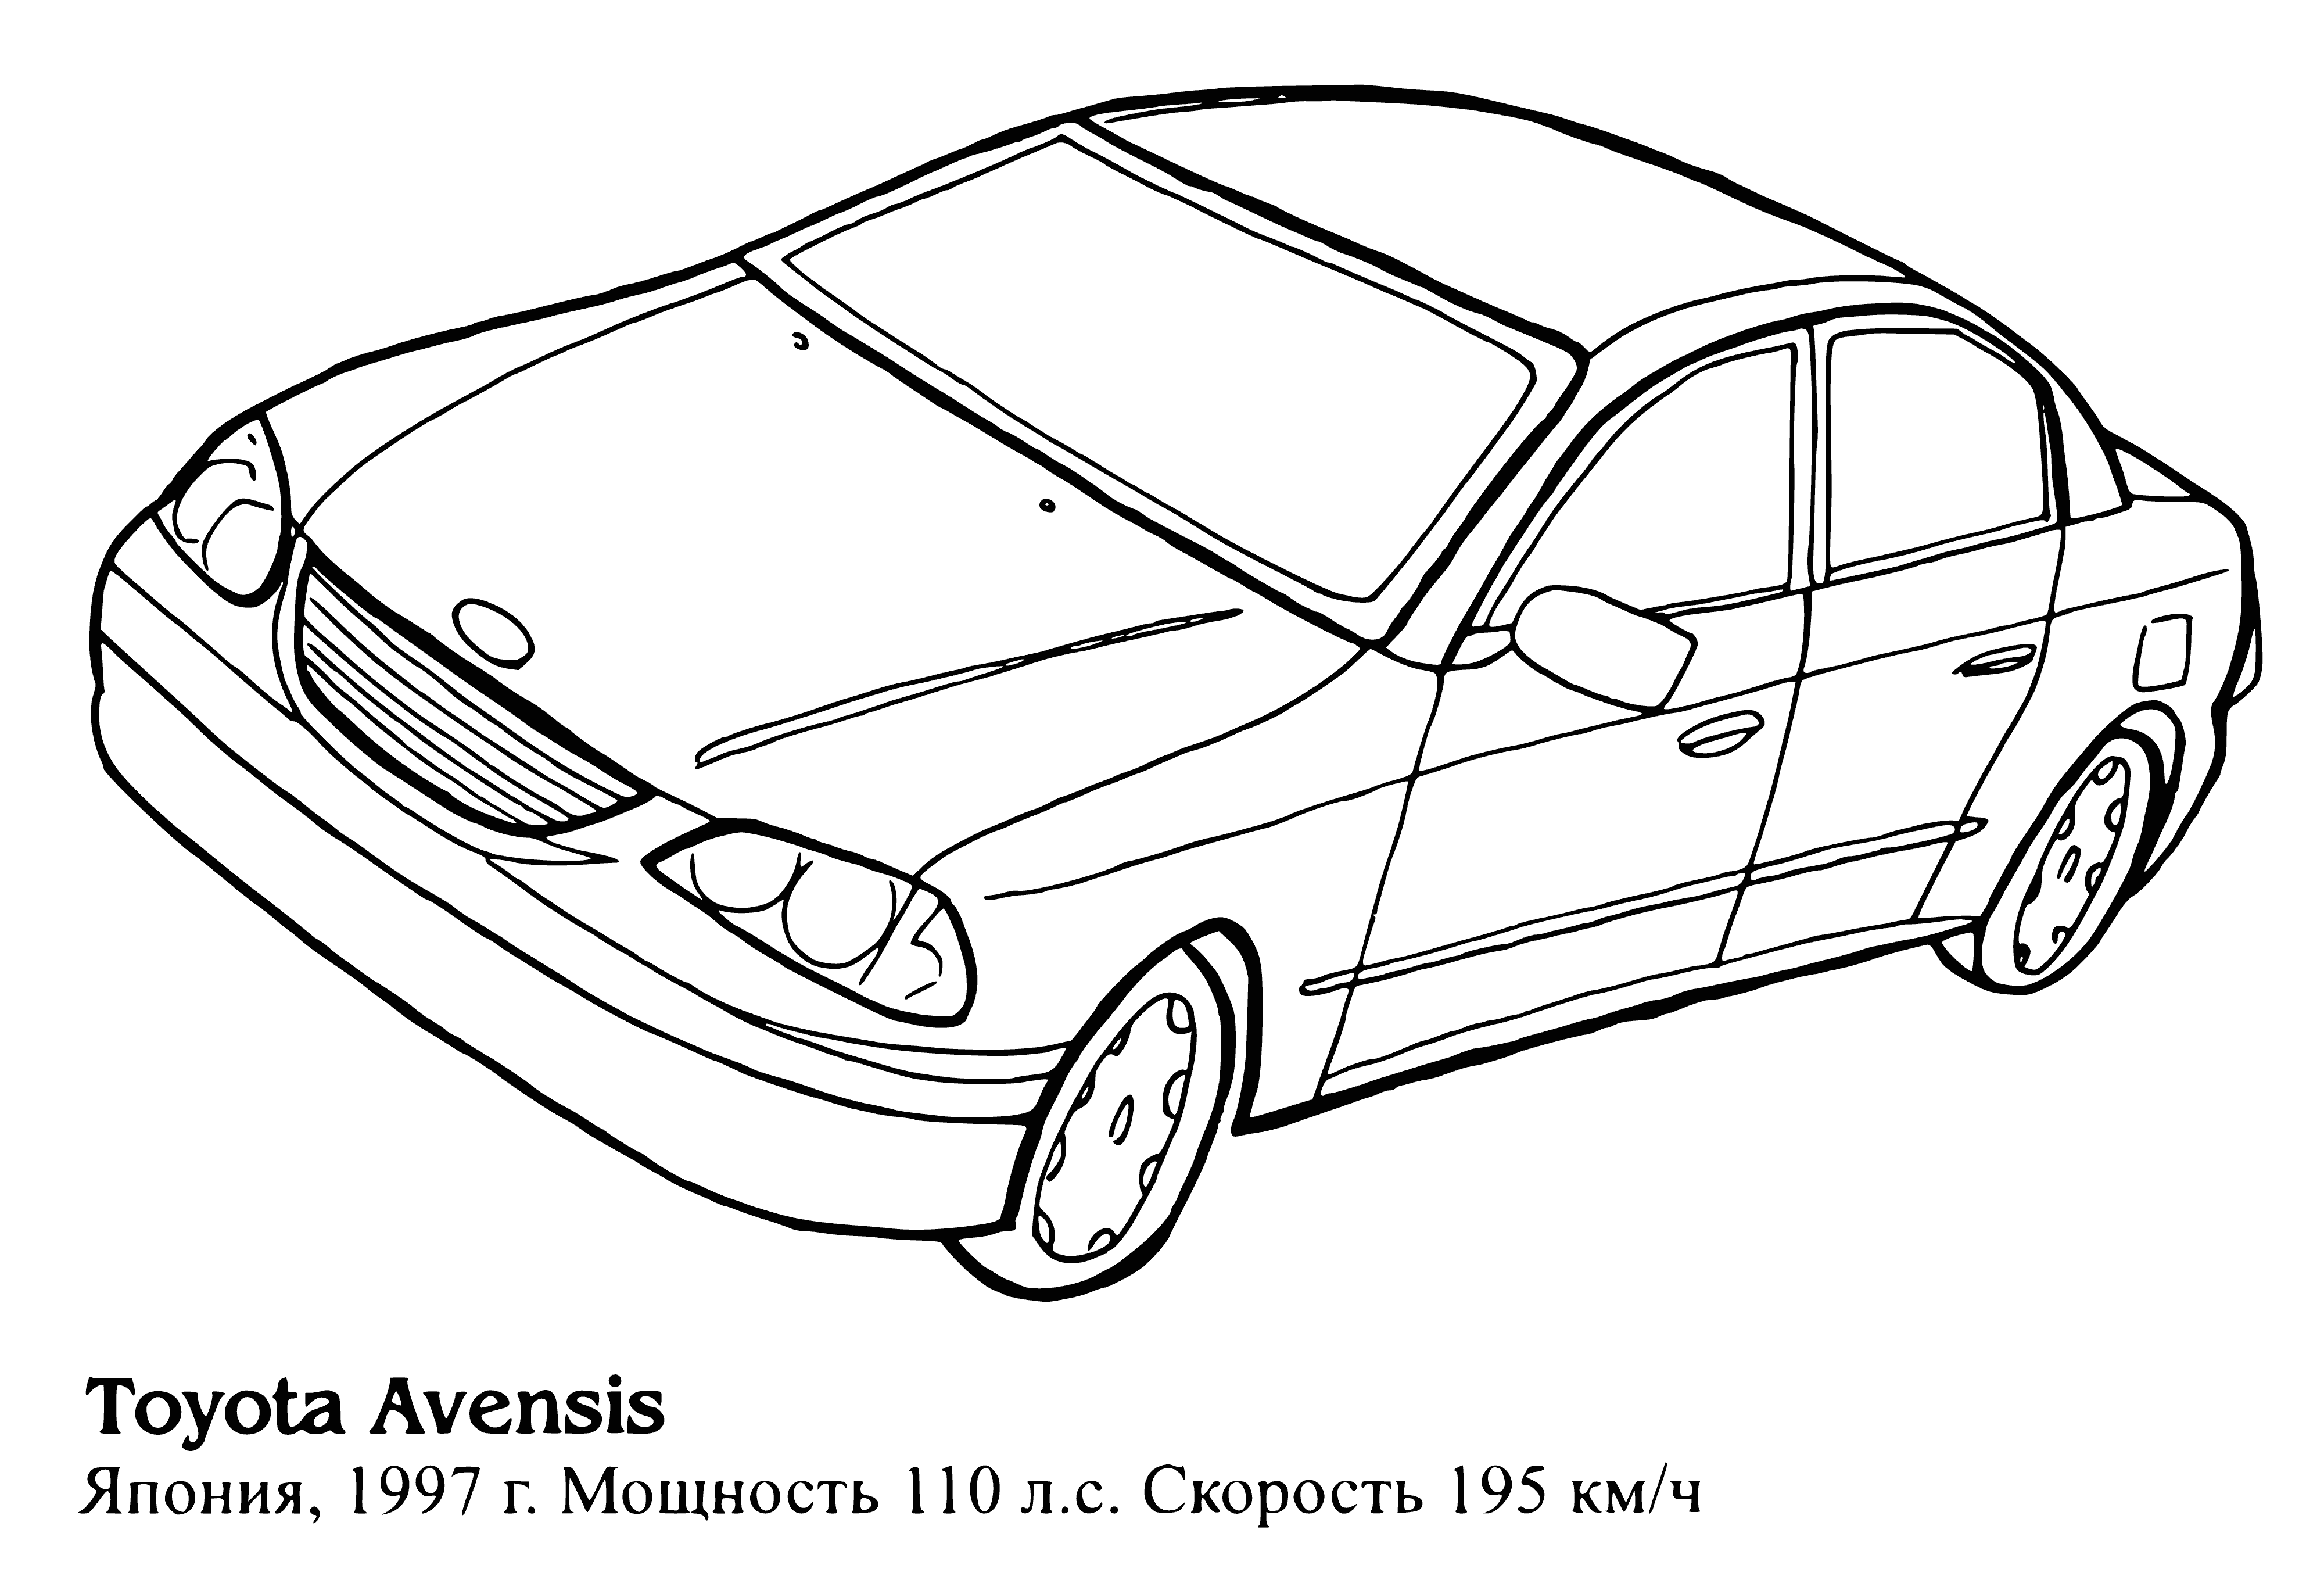 Toyota Avensis coloring page